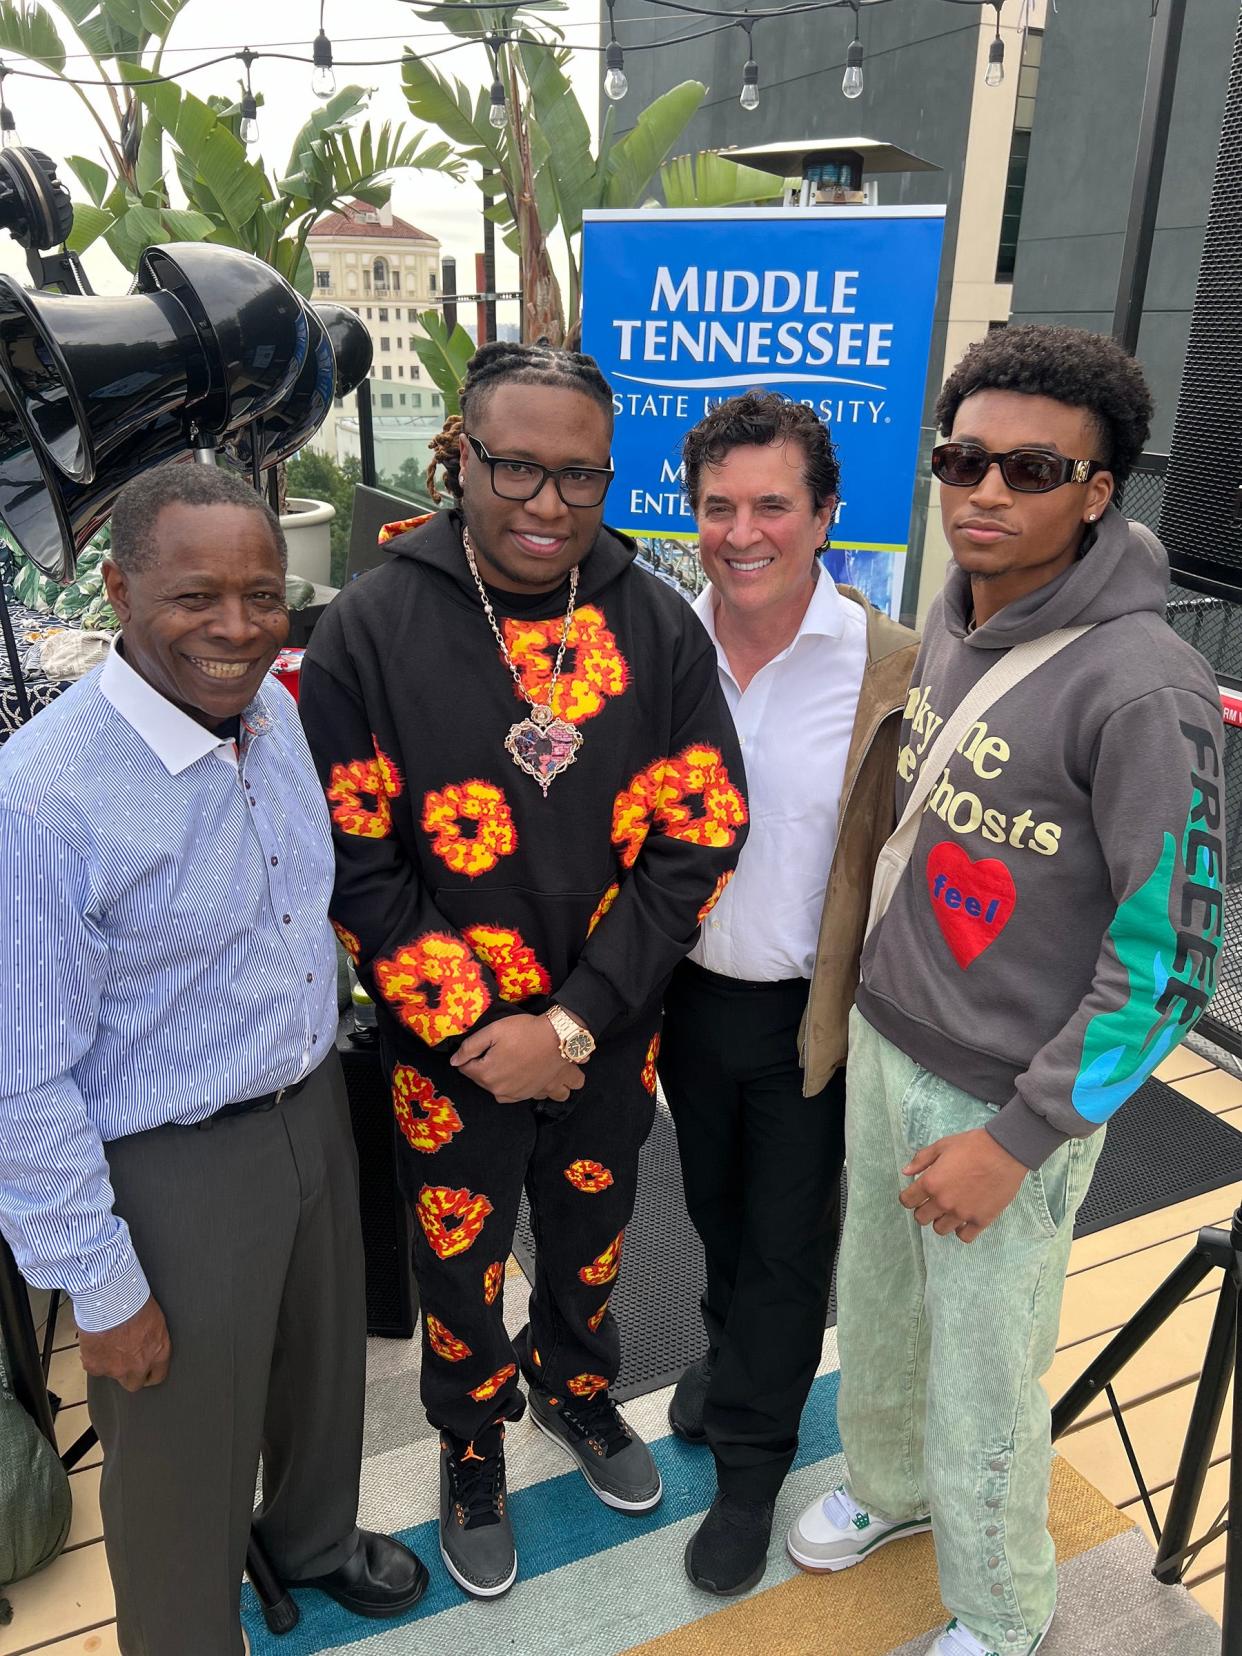 From left, Middle Tennessee State University President Sidney A. McPhee; Grammy-nominated alumnus Tay Keith; Big Machine Label Group CEO Scott Borchetta; and senior music business major Nicolas Edgerson are shown Feb. 3 at the university’s pre-Grammy brunch at Mama Shelter Hotel rooftop spot in Los Angeles. Edgerson was among several MTSU students who traveled with a university delegation to the Grammy Awards to celebrate successful alumni in the industry and network with artists and executives.